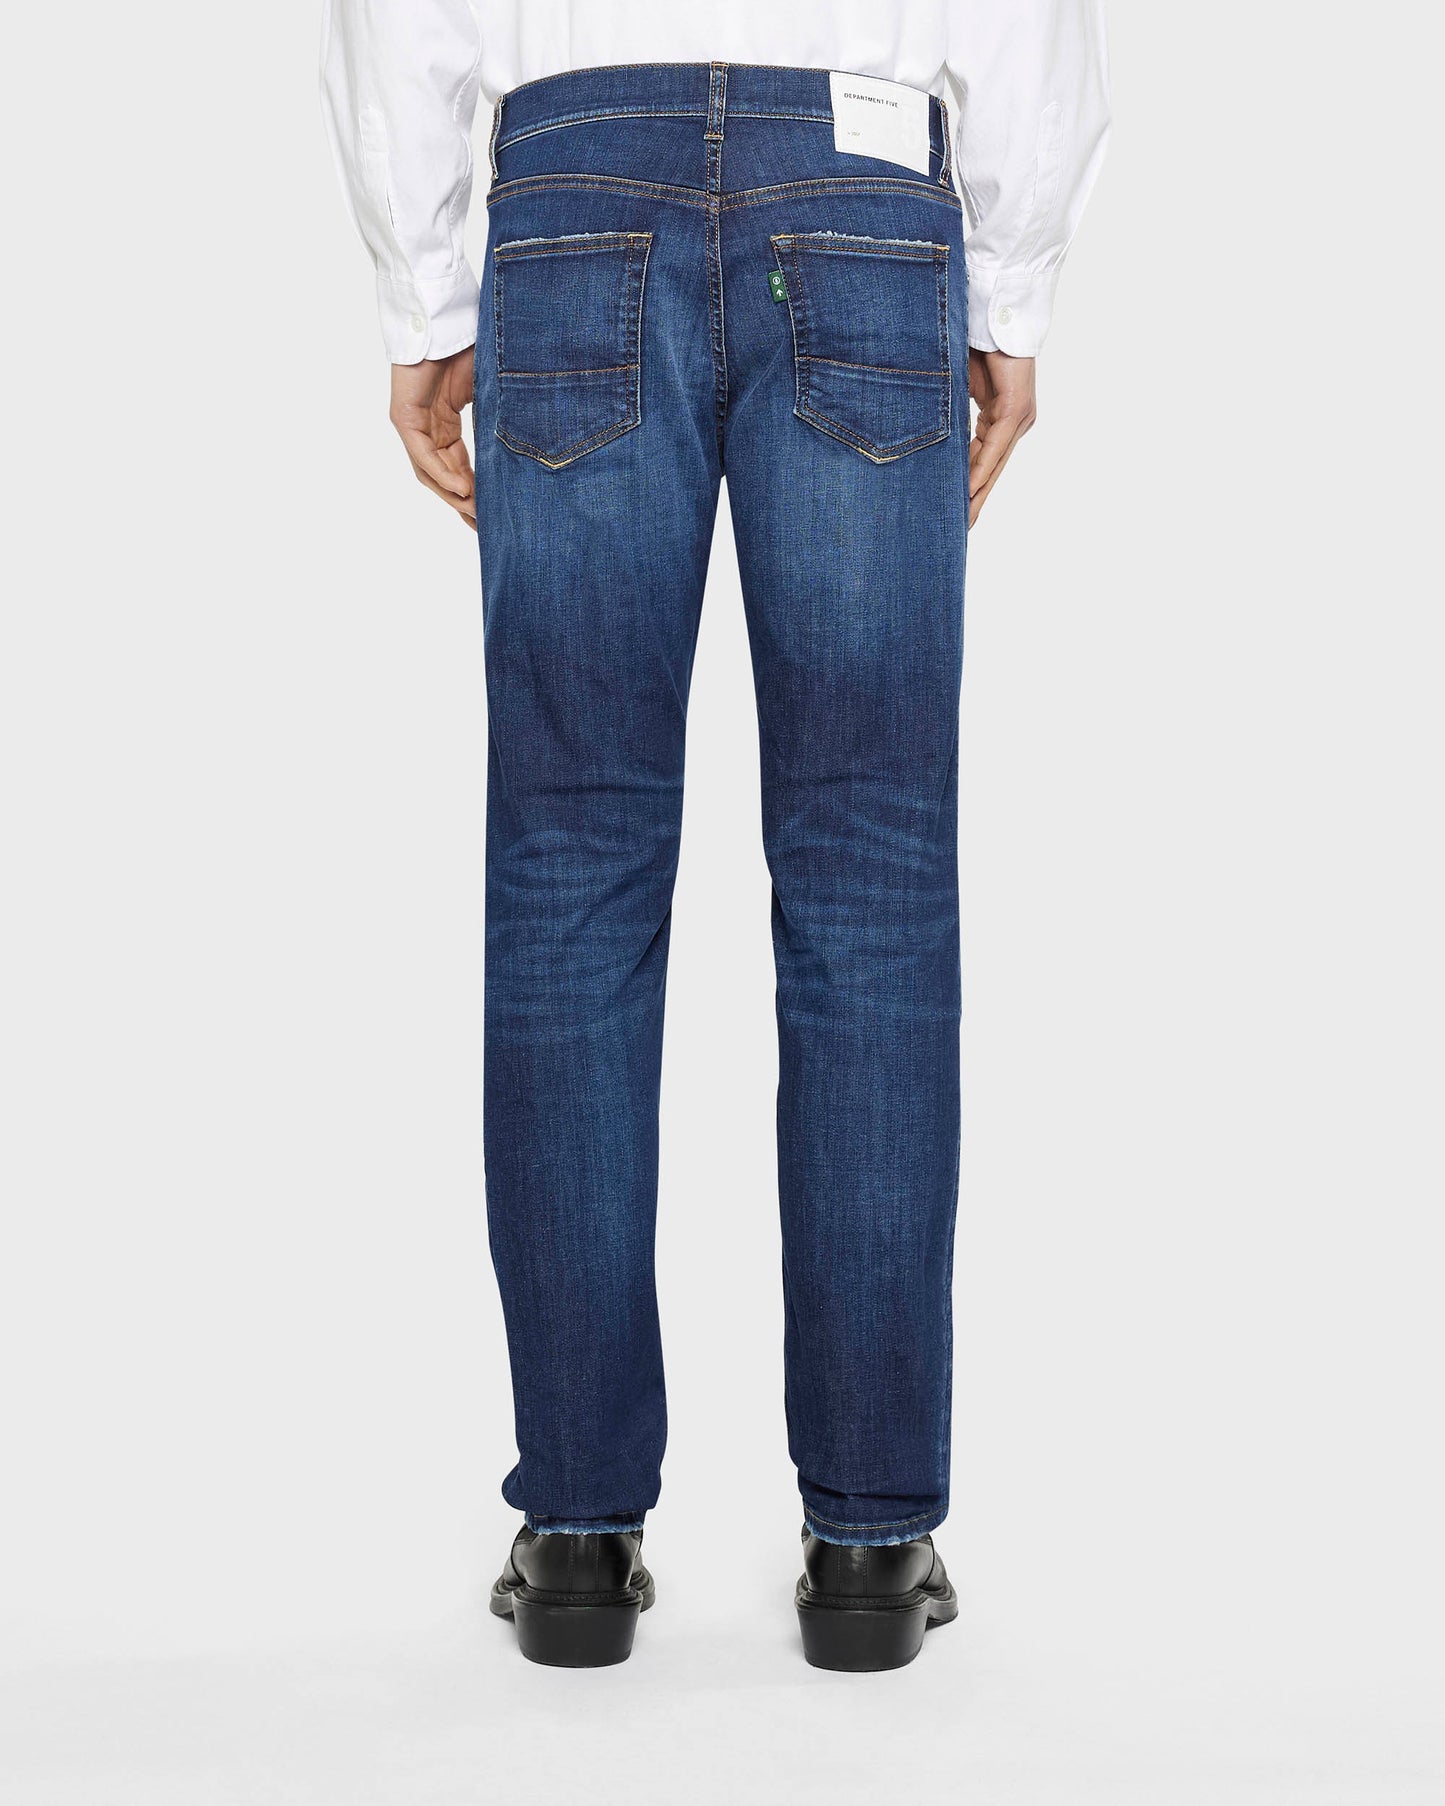 Keith jeans regular-fit